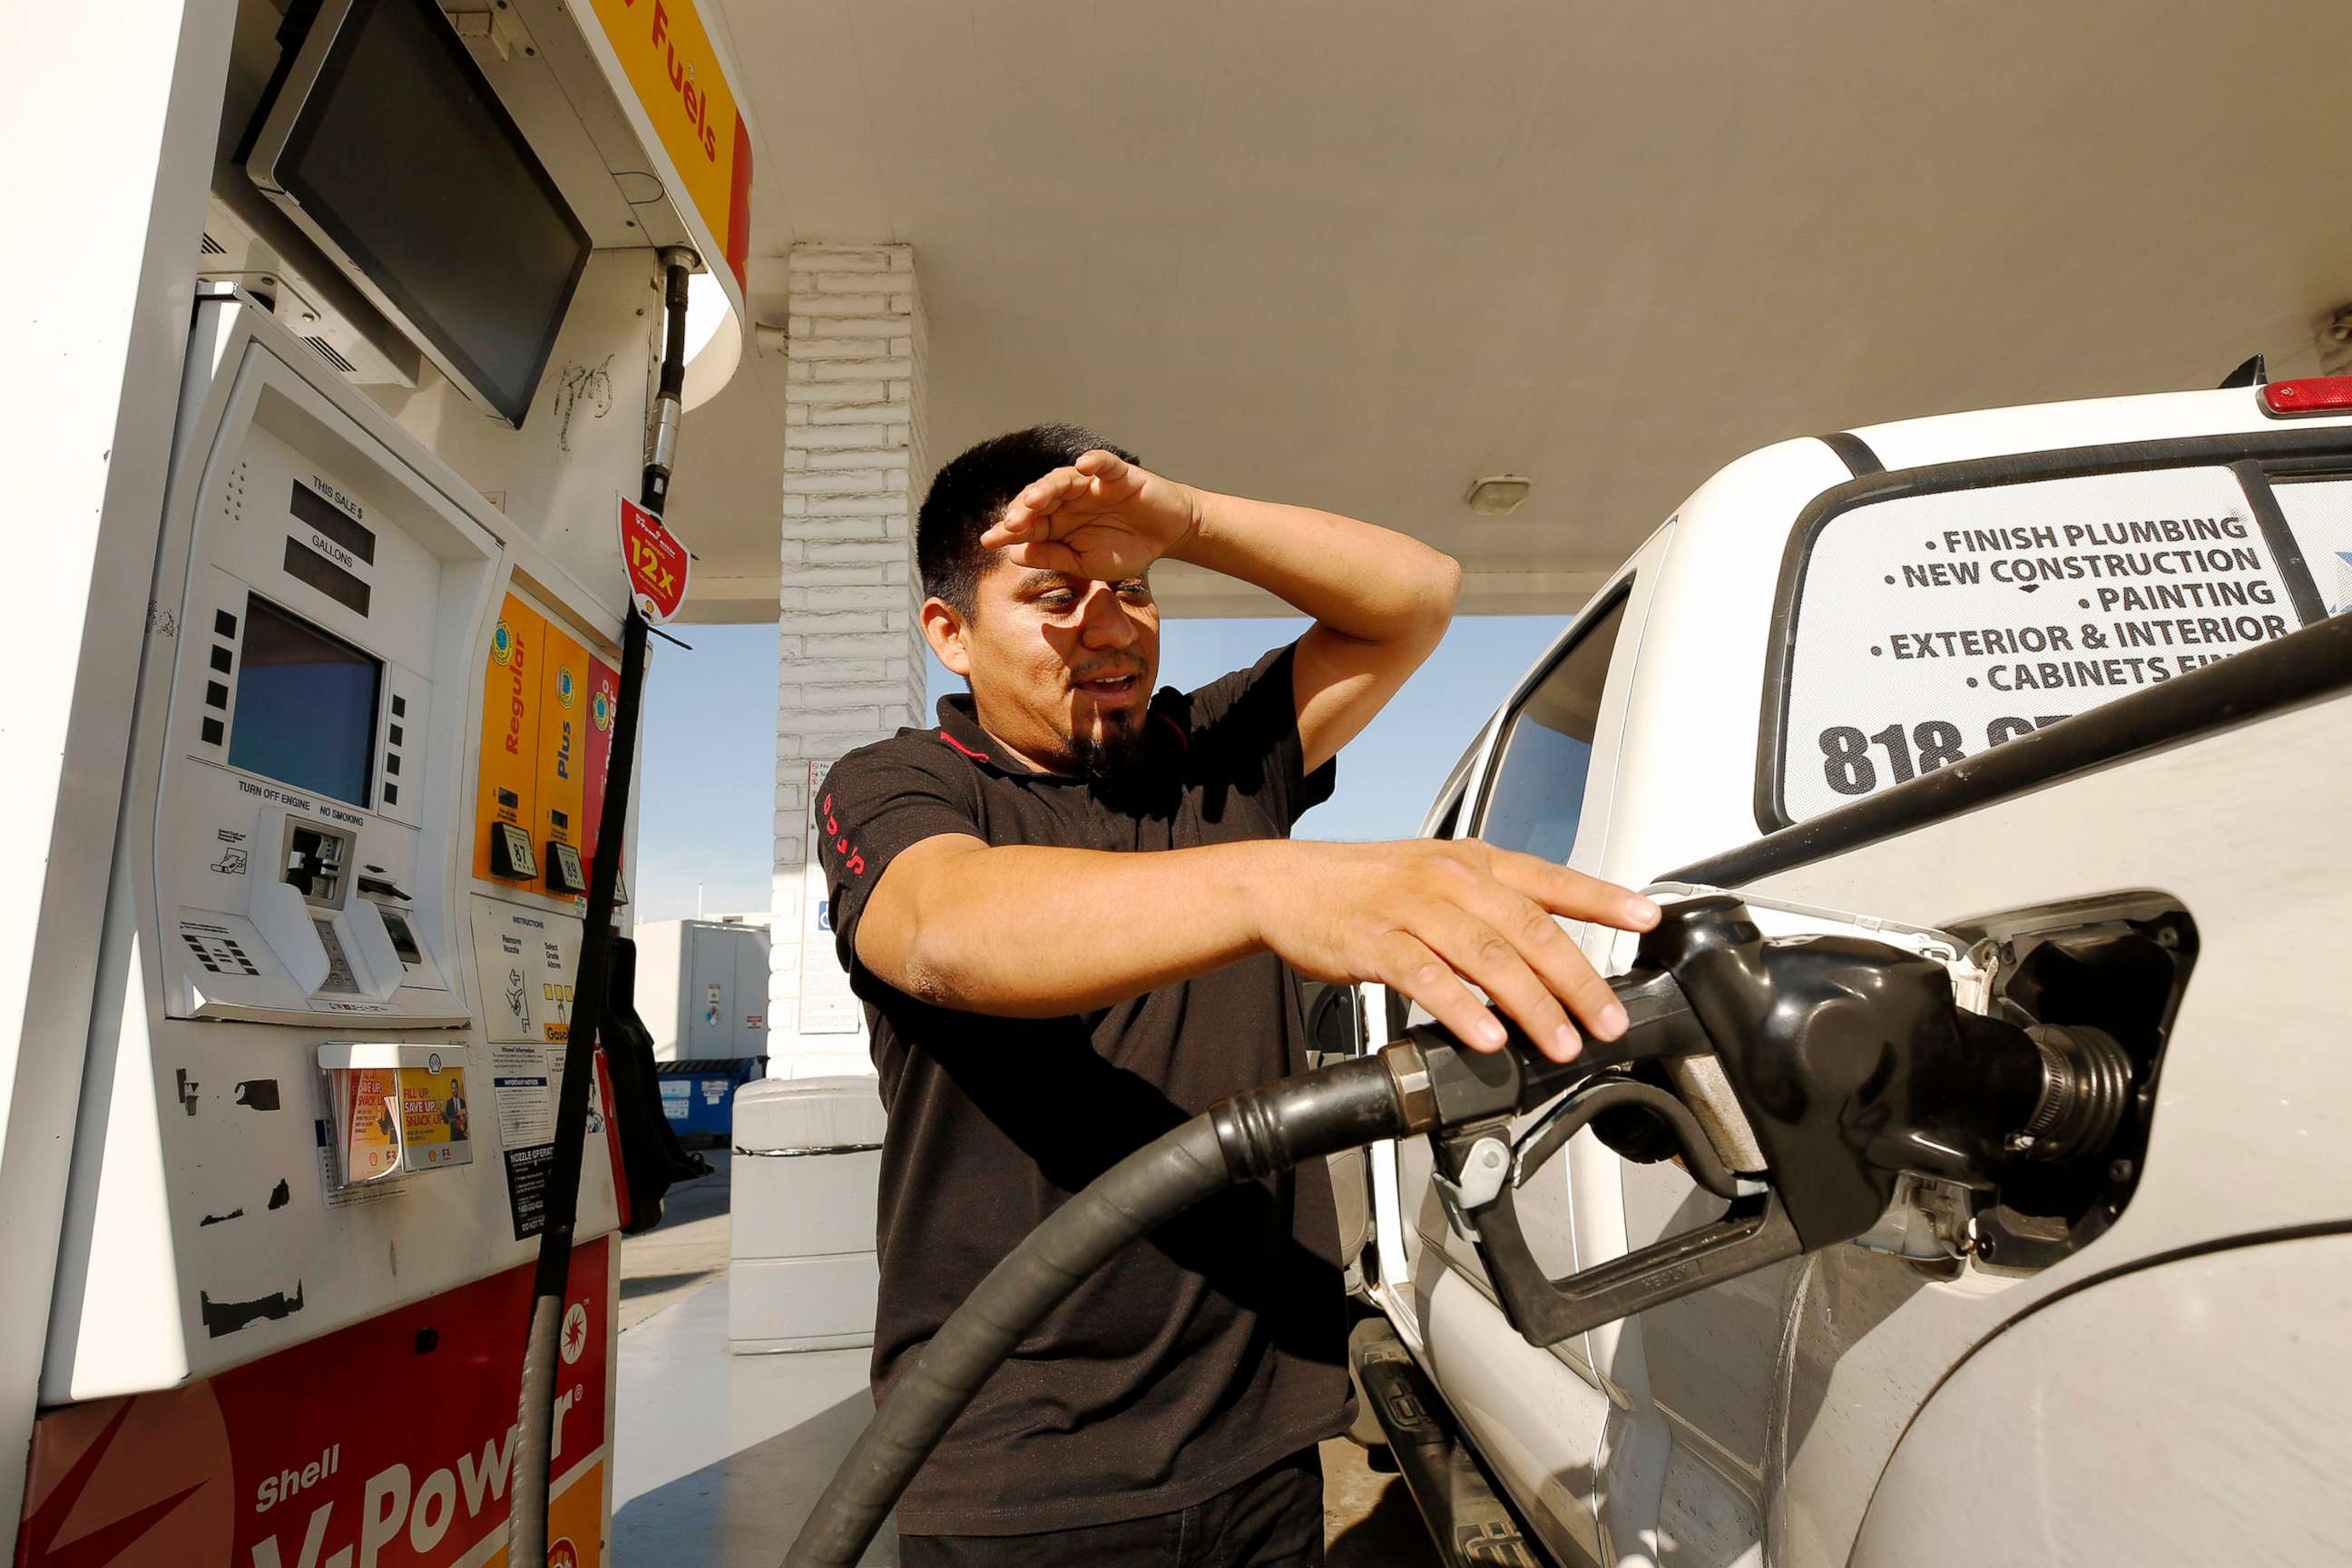 PHOTO: Alex Reyes, 28, began filling his work truck and stoped when he noticed the prices on the large marquee as drivers select from various fuels priced near of above over $6 dollars at a Shell gas station in Los Angeles, Nov. 15, 2021.